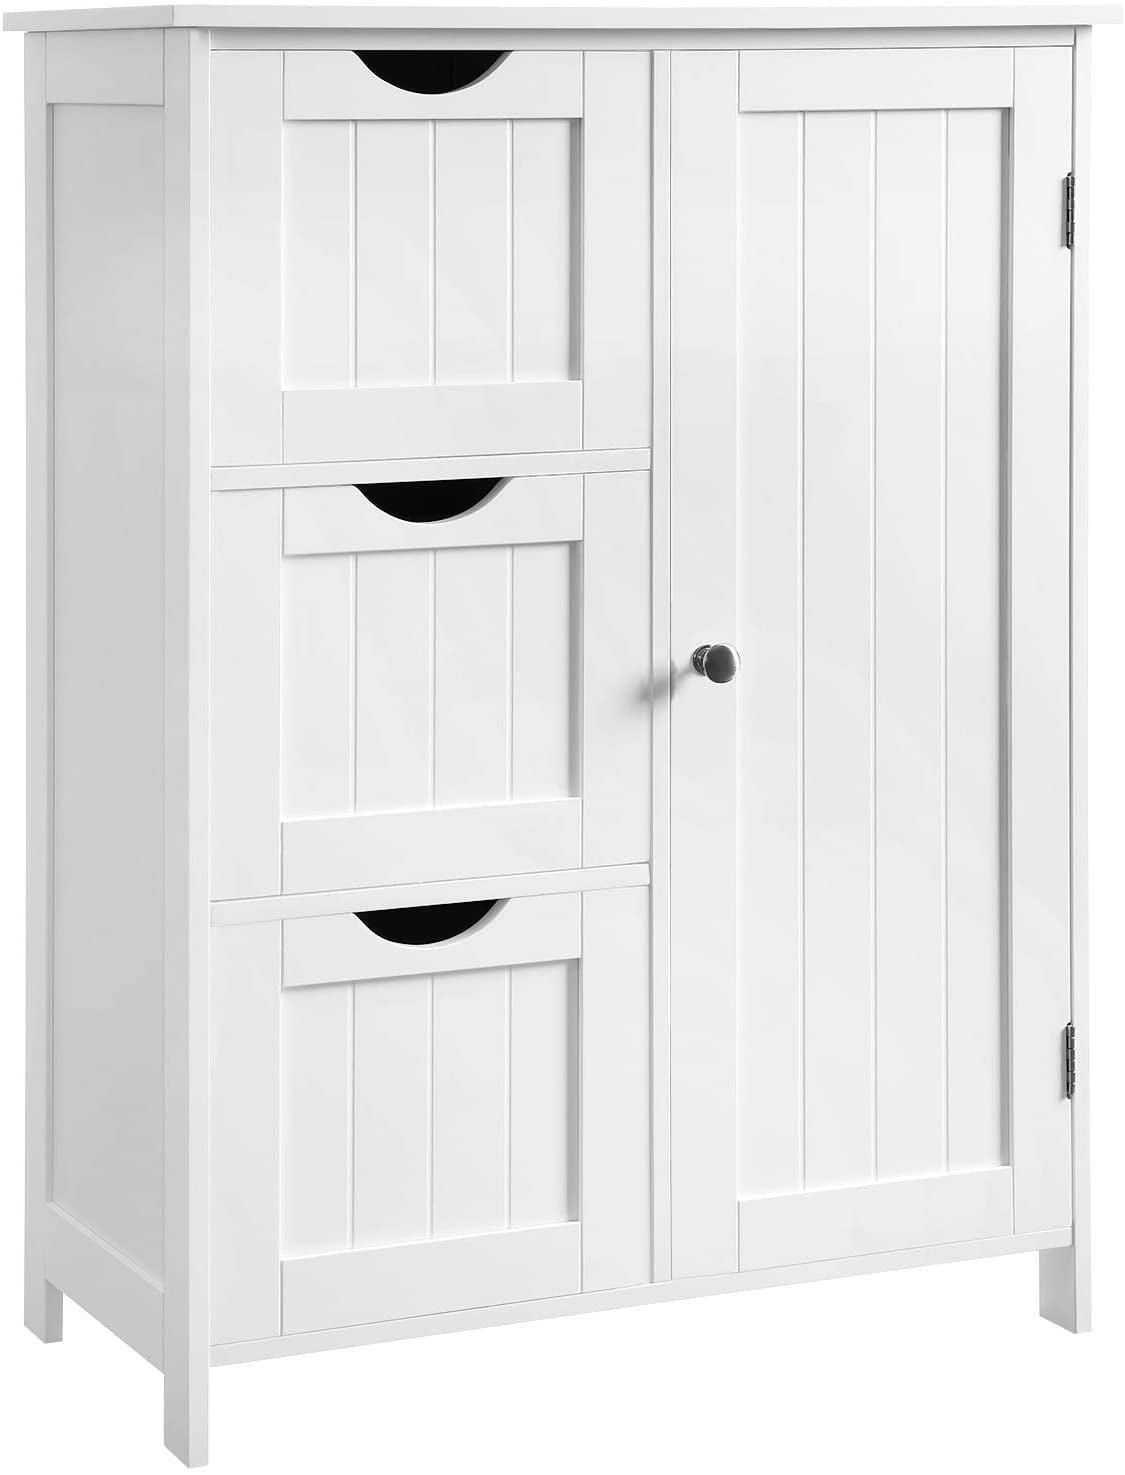 Bathroom Storage Cabinet White Floor, White Storage Cabinets With Doors And Shelves